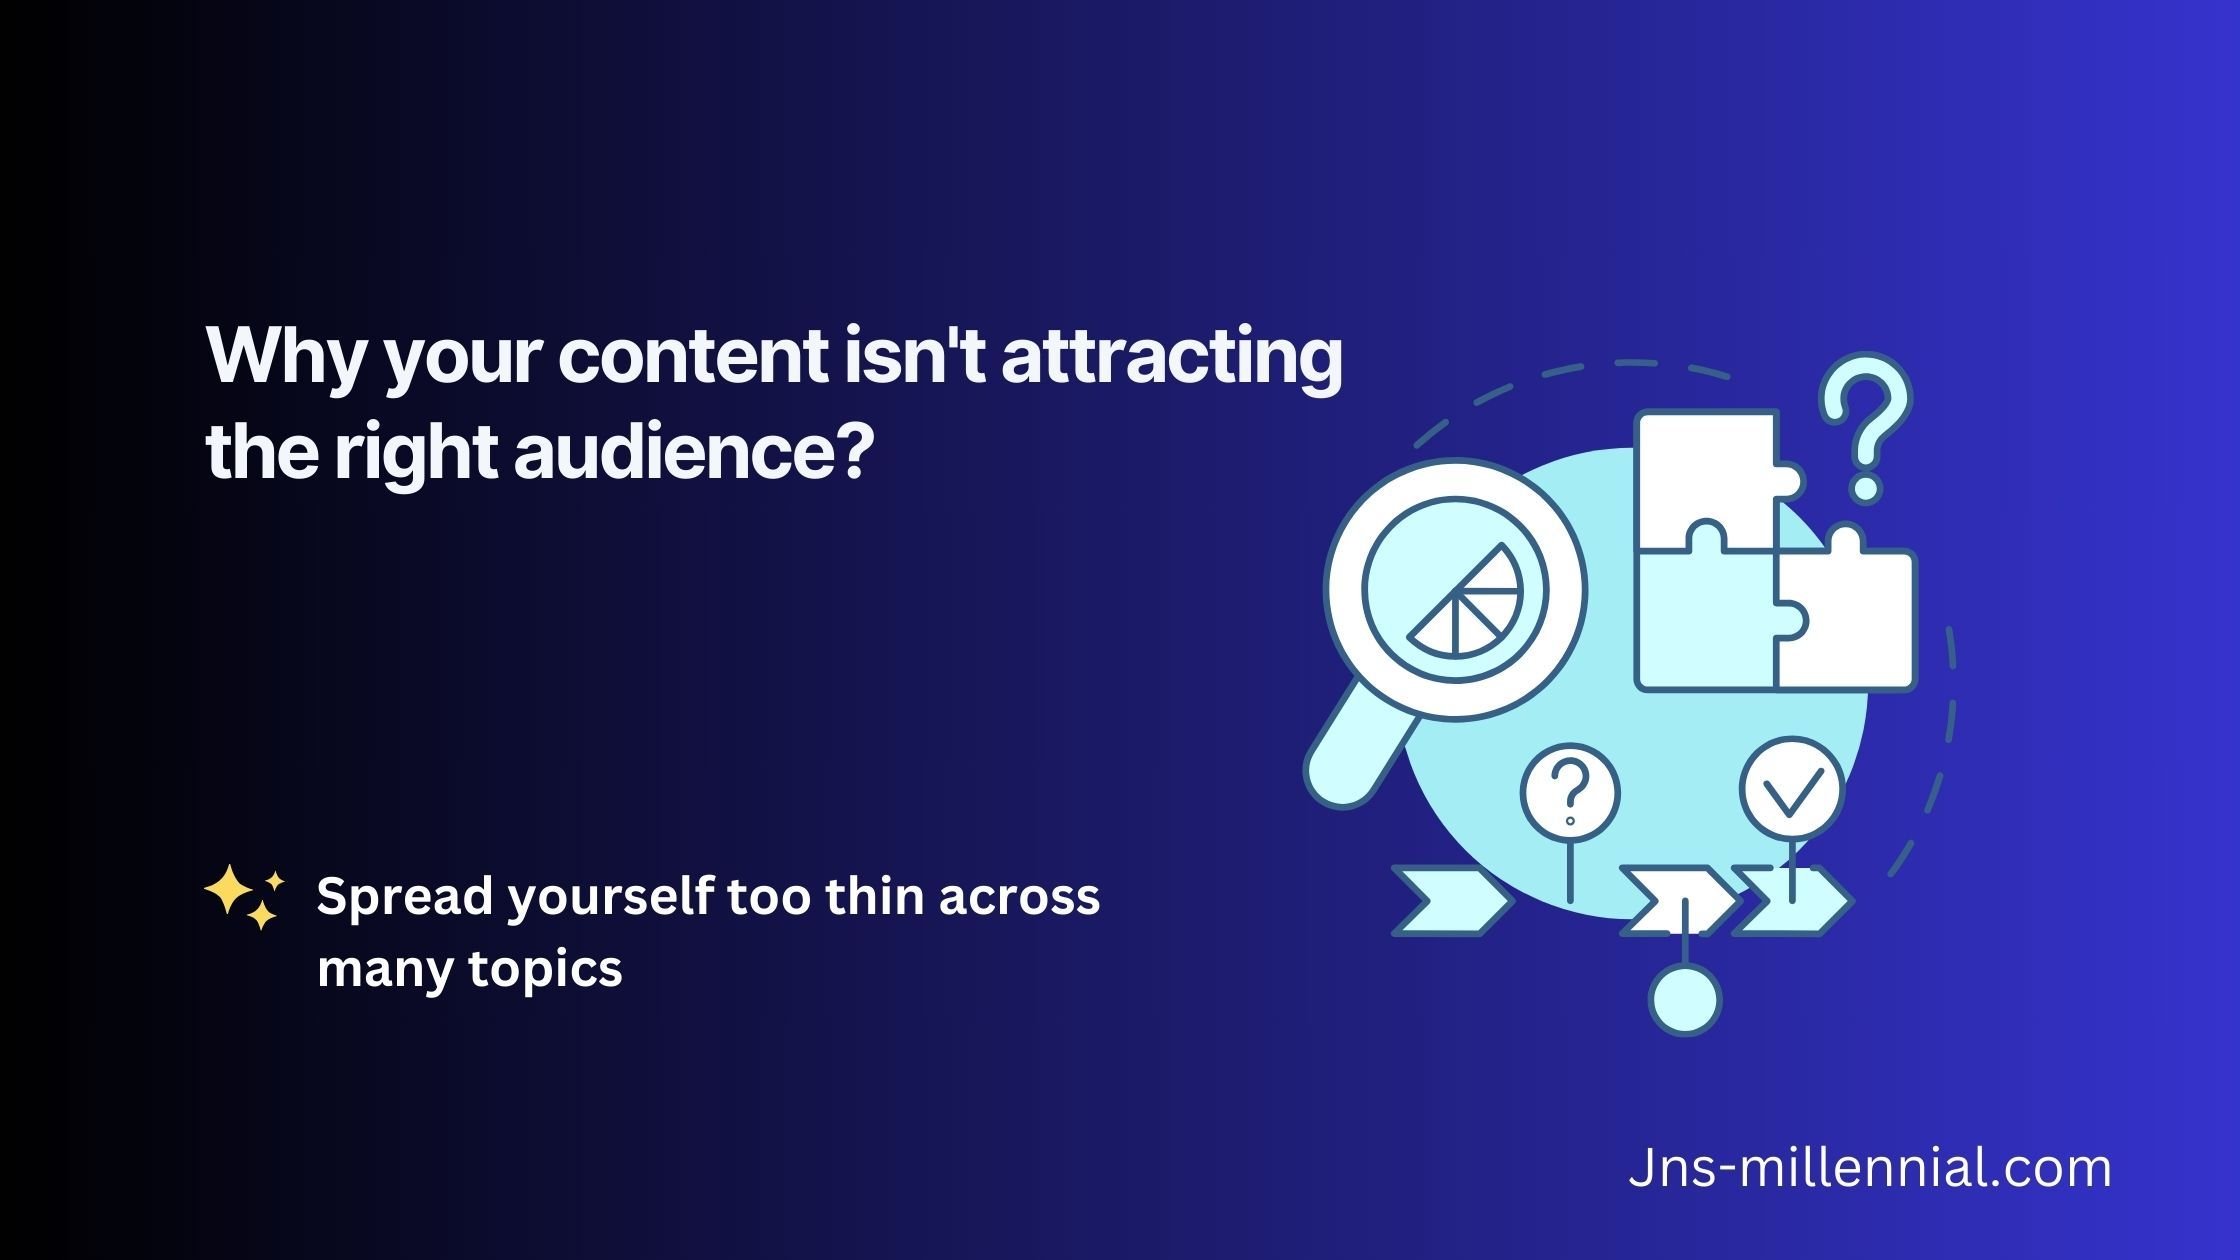 People Fail at Creating Attractive Content Because They don't Focus on Their Niche